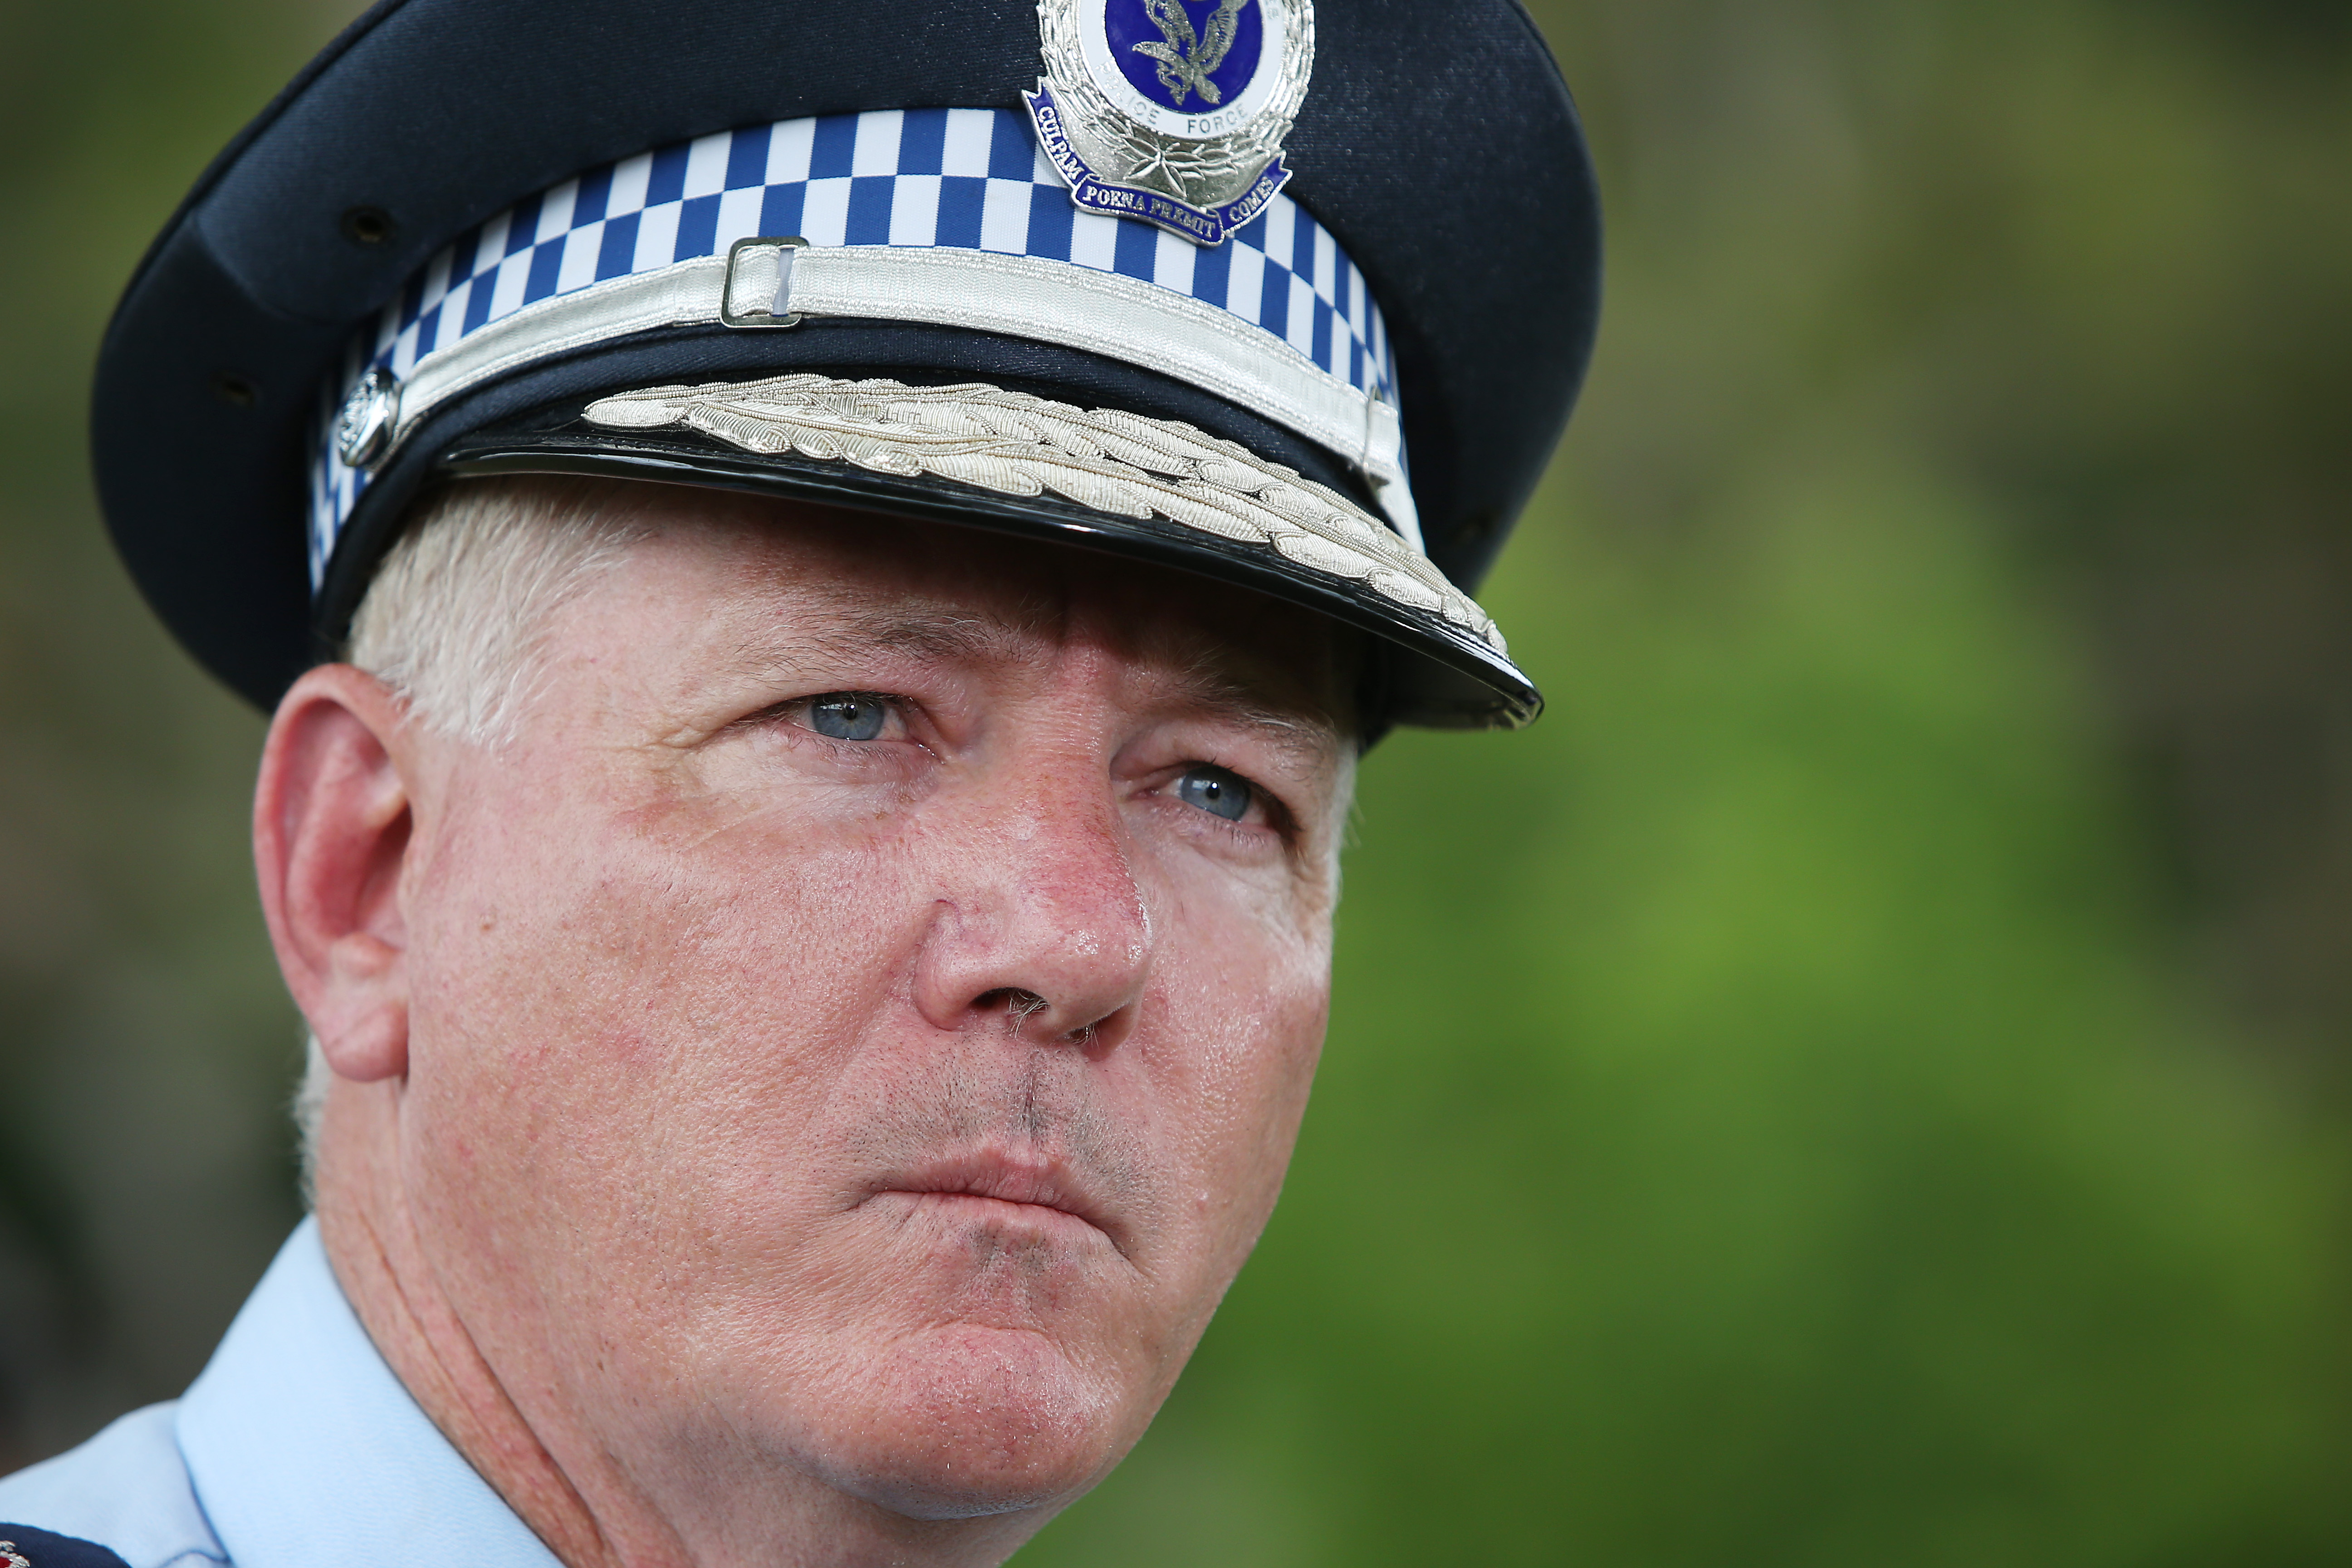 NSW’s Top Cop Backtracks On Idiotic Sexual Consent App Proposal, All The While Victim-Blaming